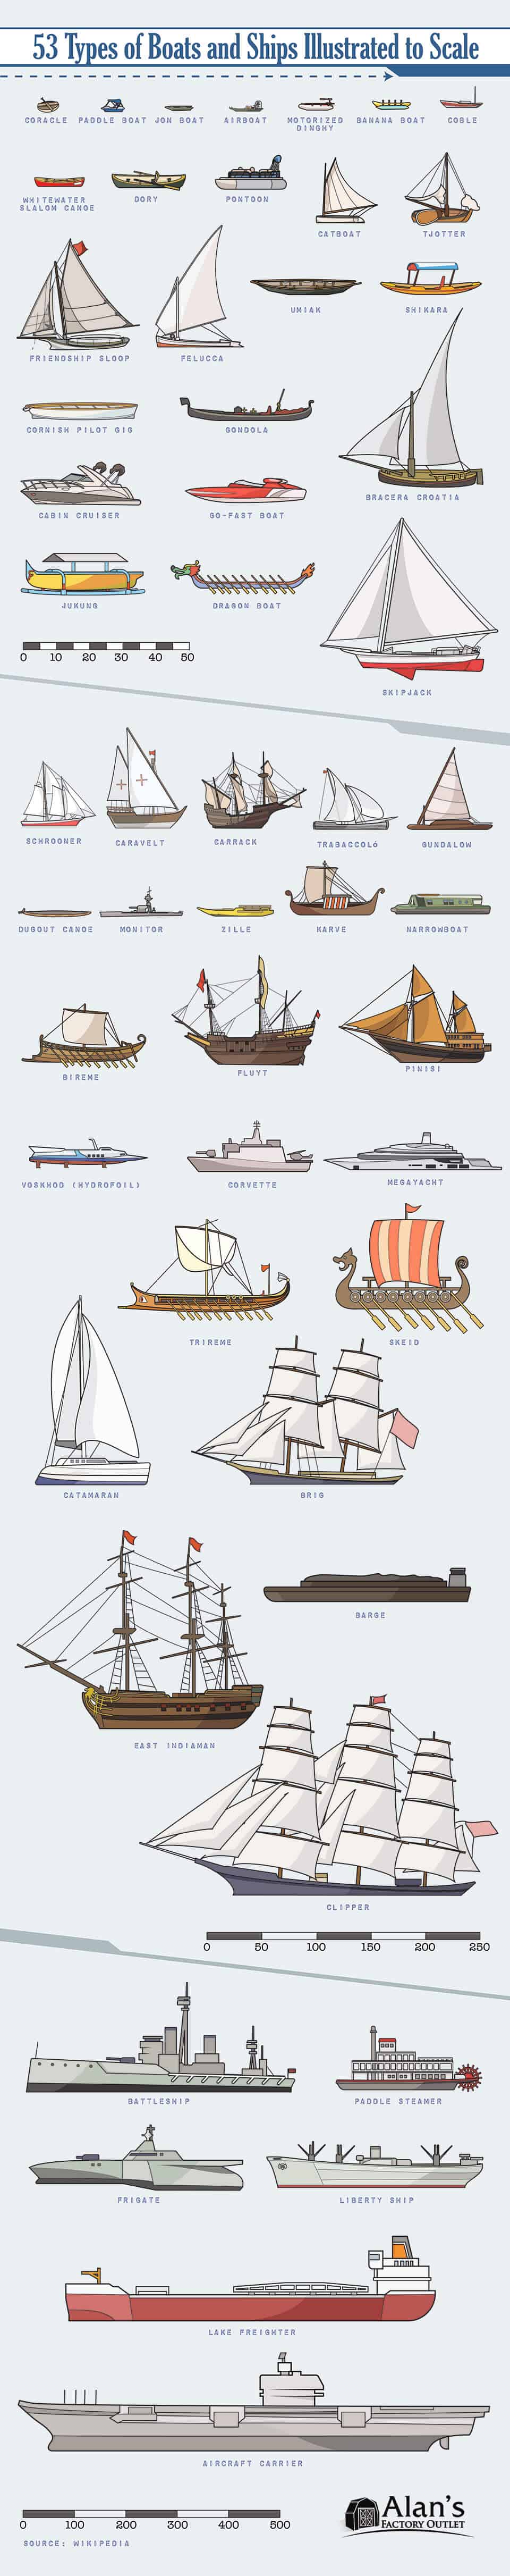 53-types-of-boats-ships-illustrated-to-scale-3.jpg